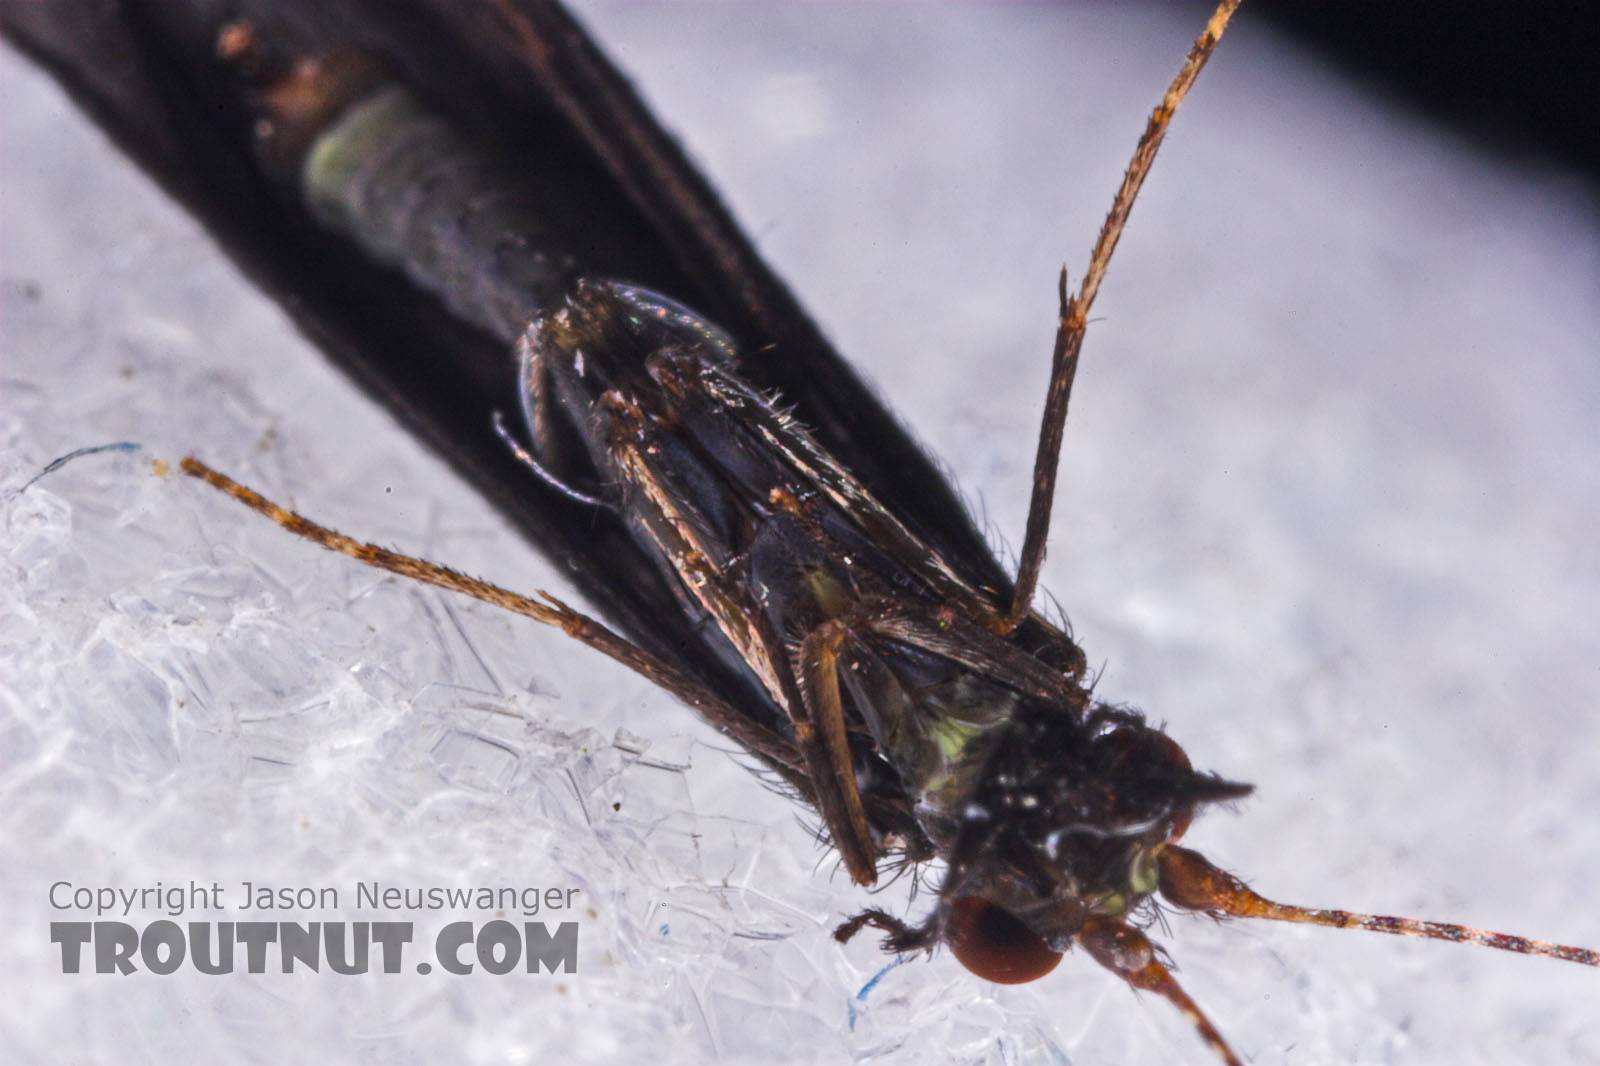 Male Mystacides sepulchralis (Black Dancer) Caddisfly Adult from the West Branch of Owego Creek in New York